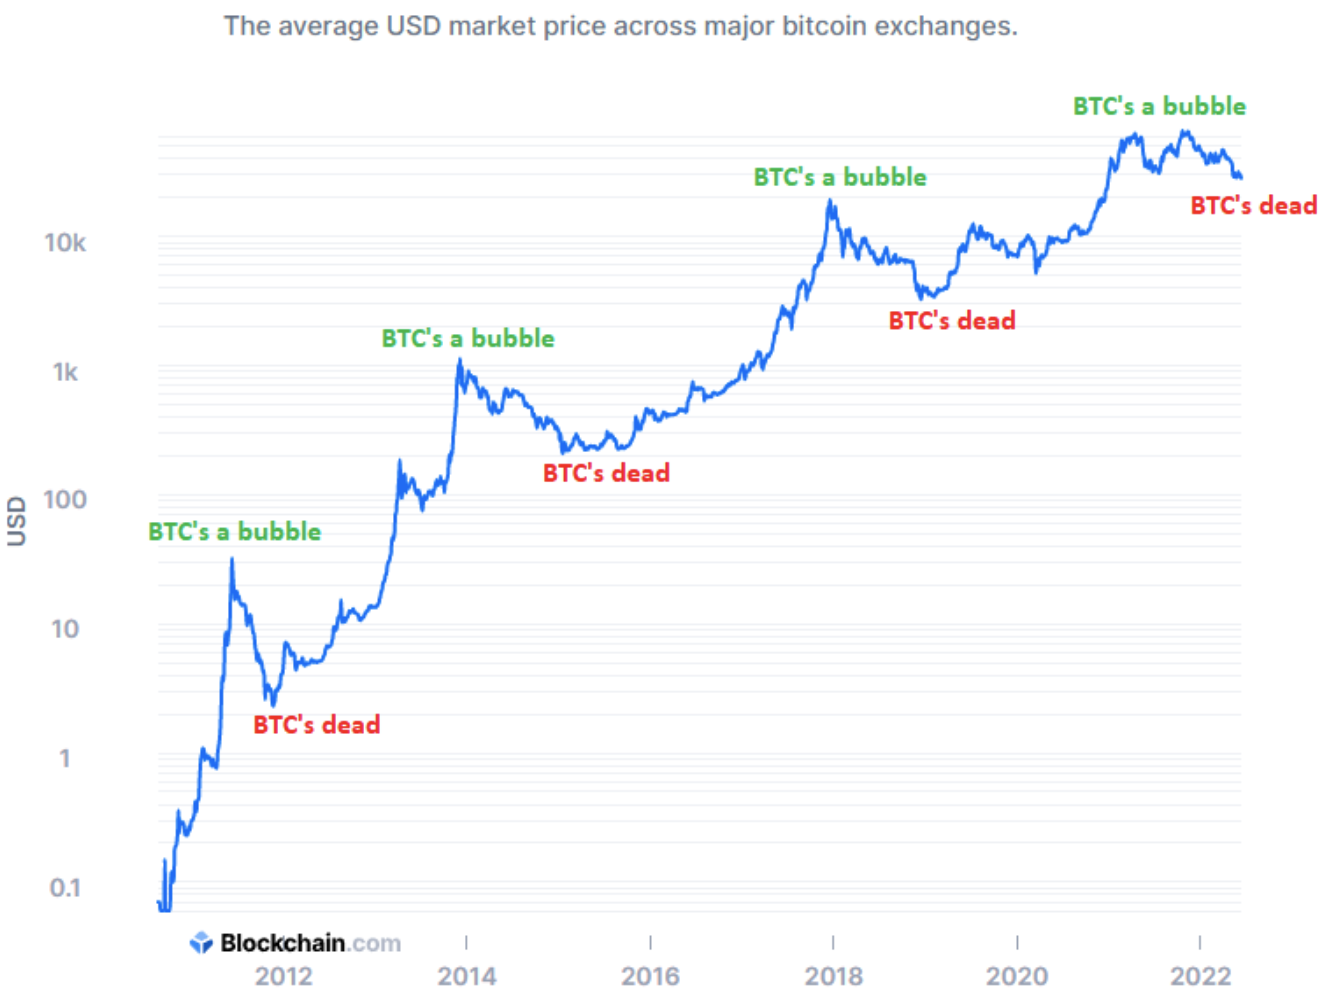 Bitcoin market price (USD). Note: Y Axis is on a logarithmic scale. Source: Blockchain.com